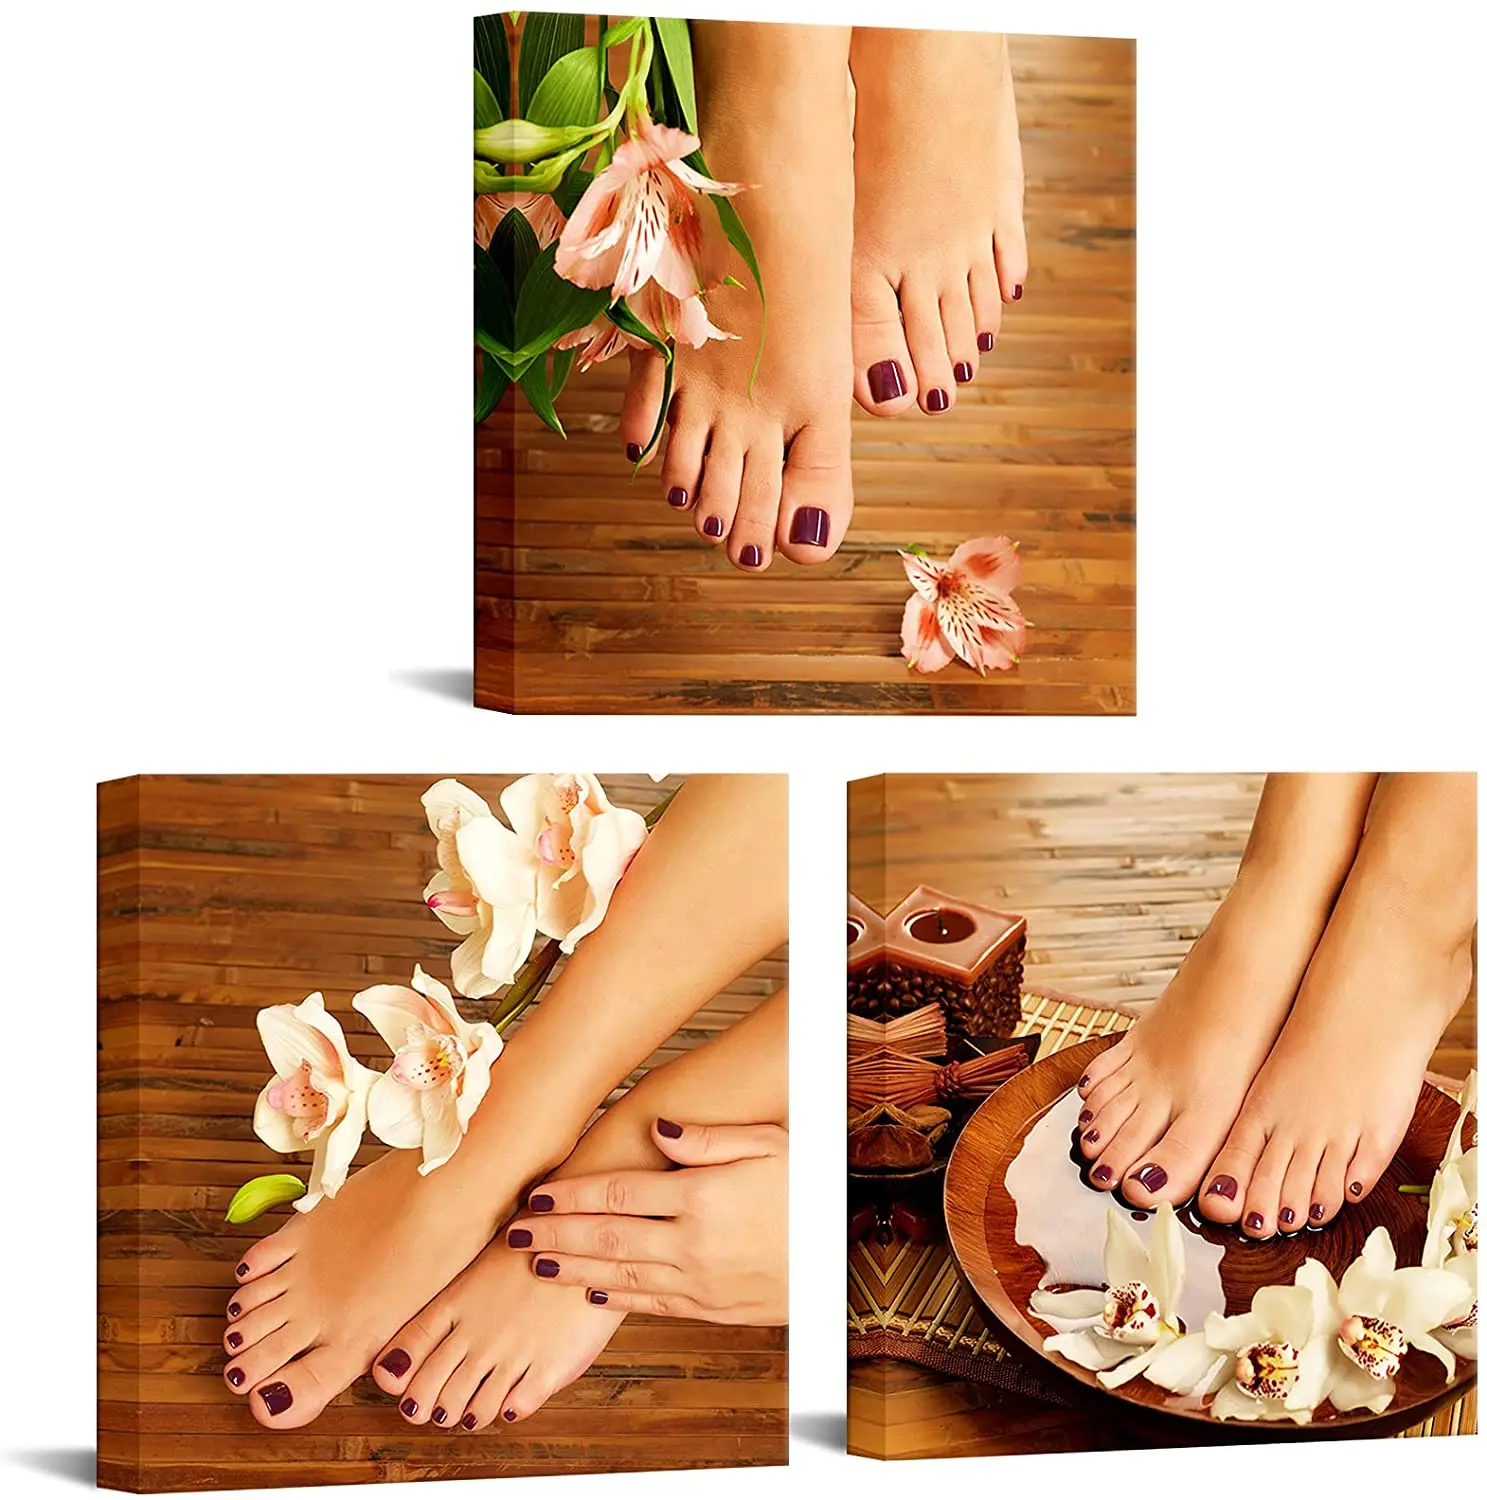 

3 Pcs Nail Foot Pedicure Body Health Spa Beauty Salon Posters Wall Art Canvas Pictures Home Decor HD Paintings Room Decorations